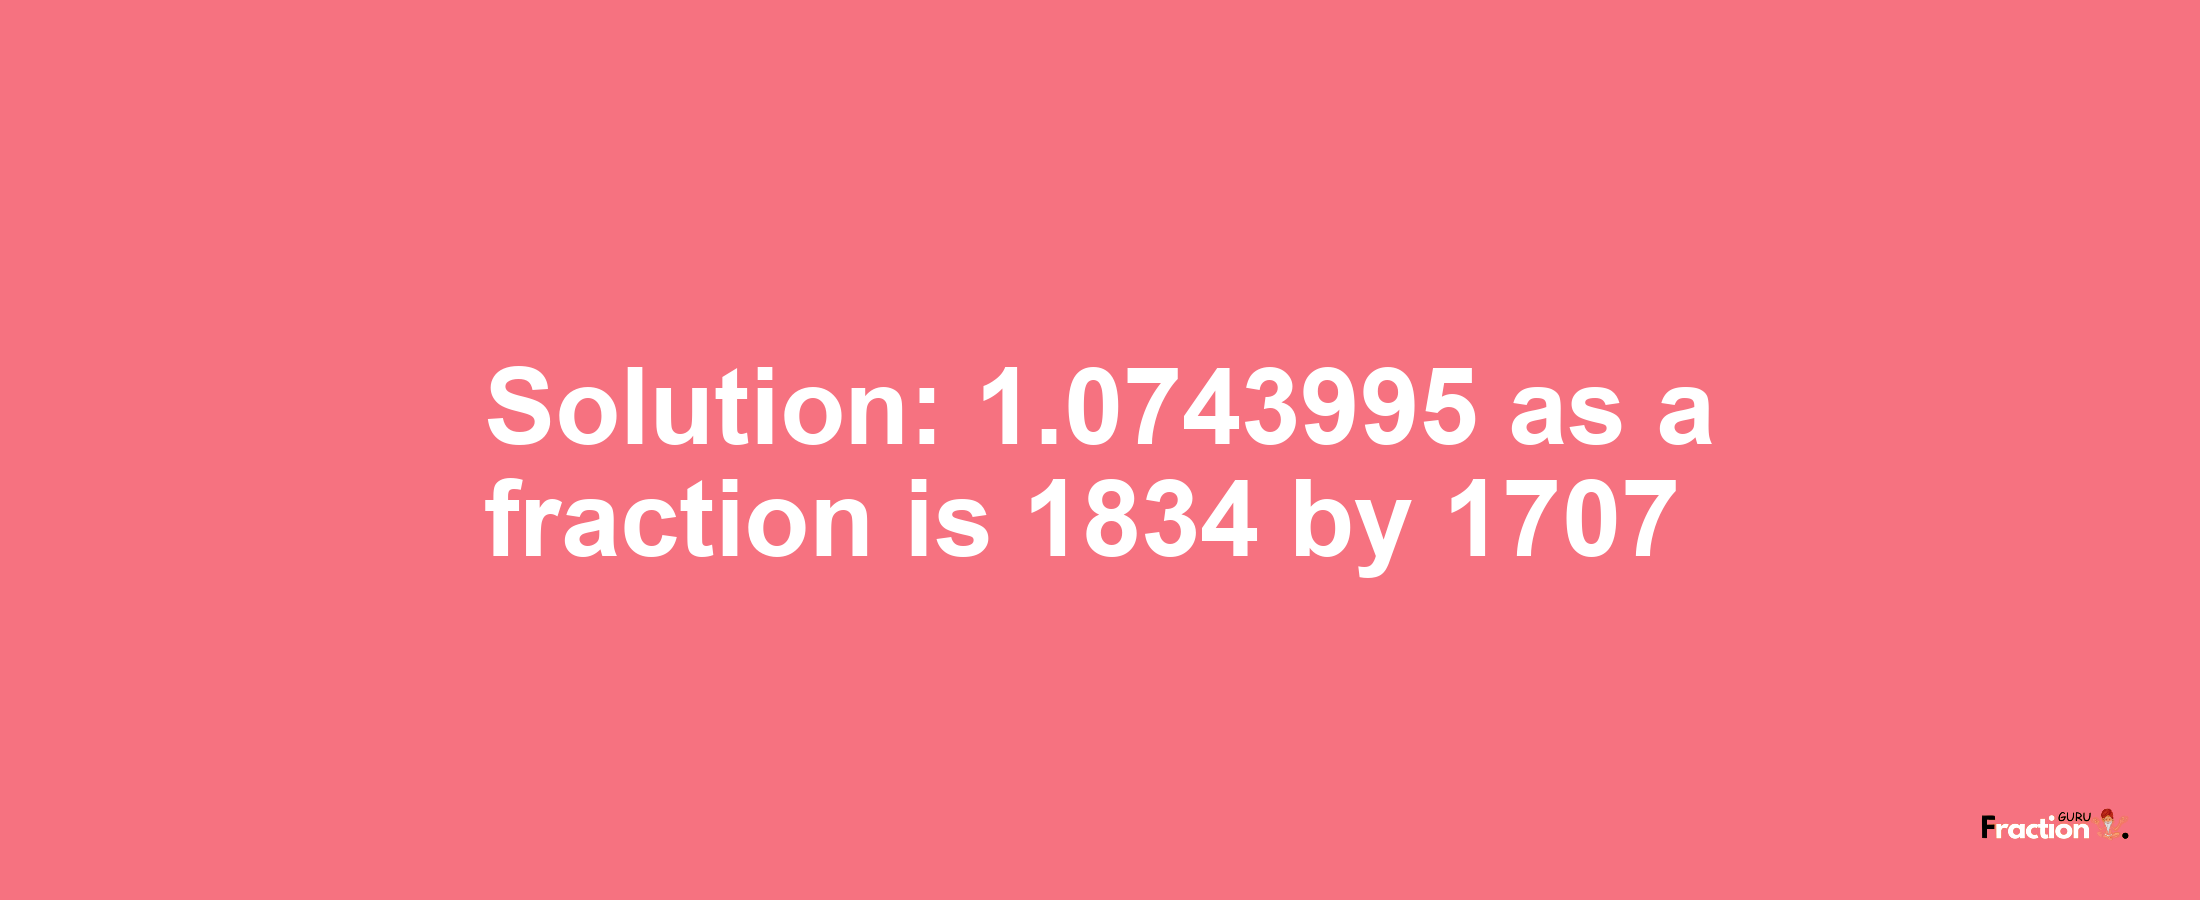 Solution:1.0743995 as a fraction is 1834/1707